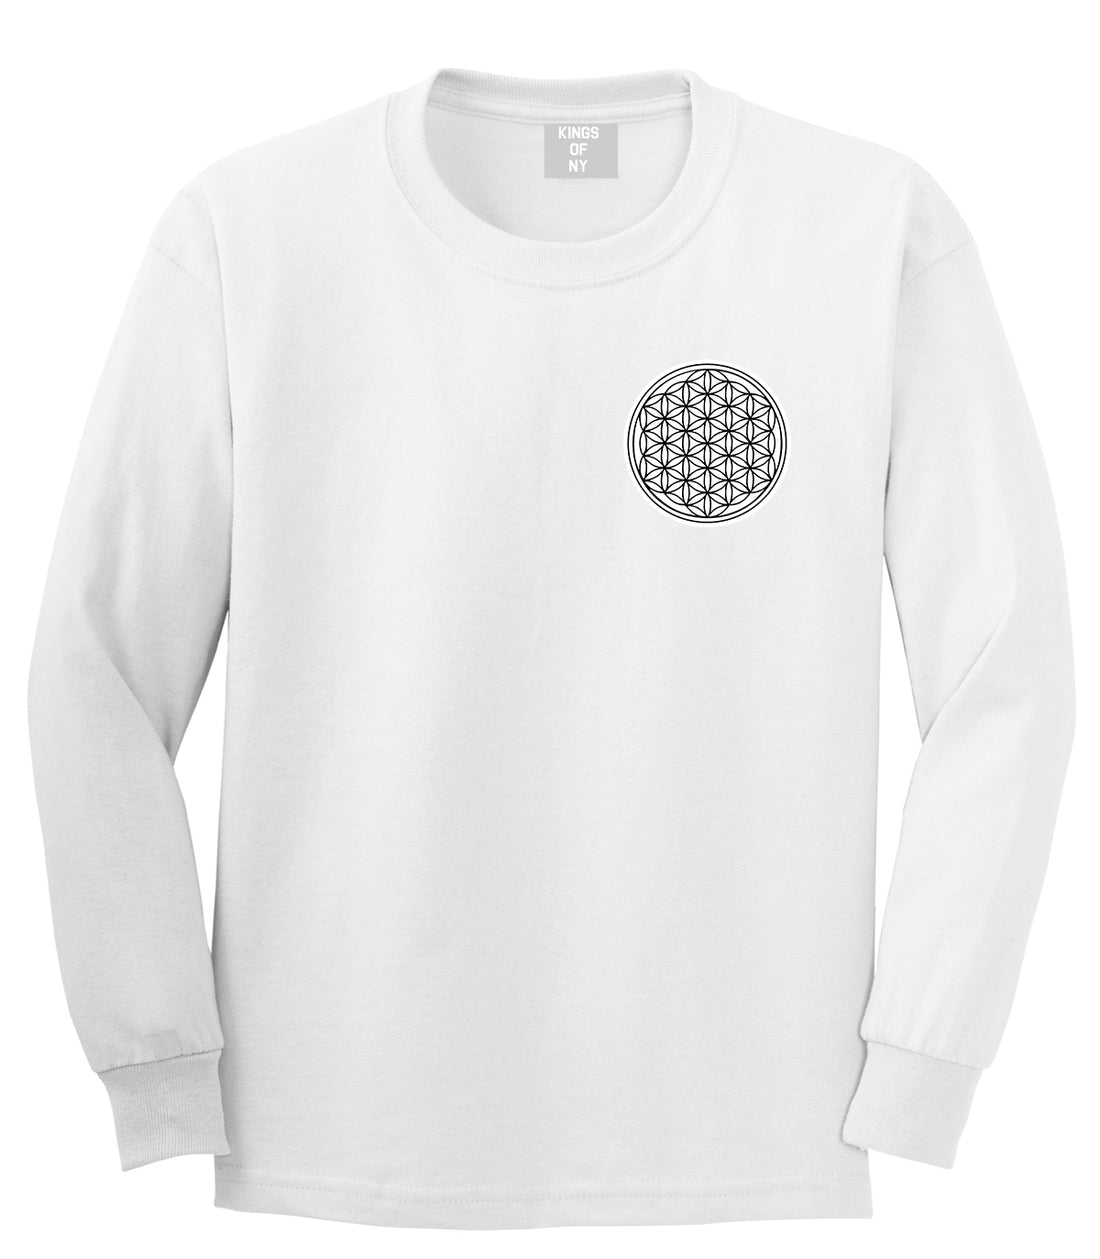 Flower Of Life Chest Mens White Long Sleeve T-Shirt by KINGS OF NY